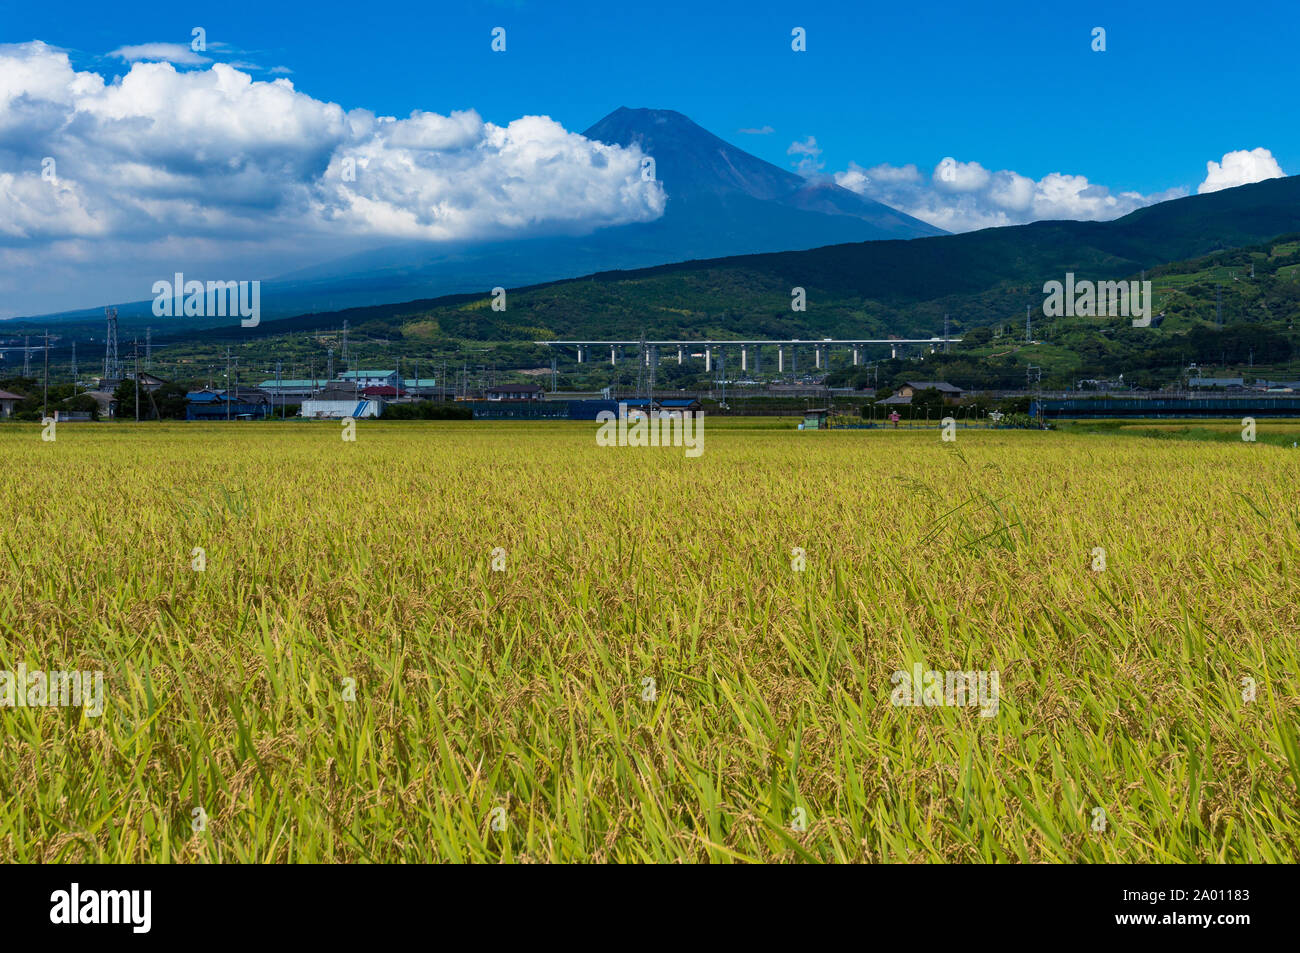 Japanese countryside landscape of rice field with Mt Fuji on the background on sunny day. Rural Japan farmlands Stock Photo